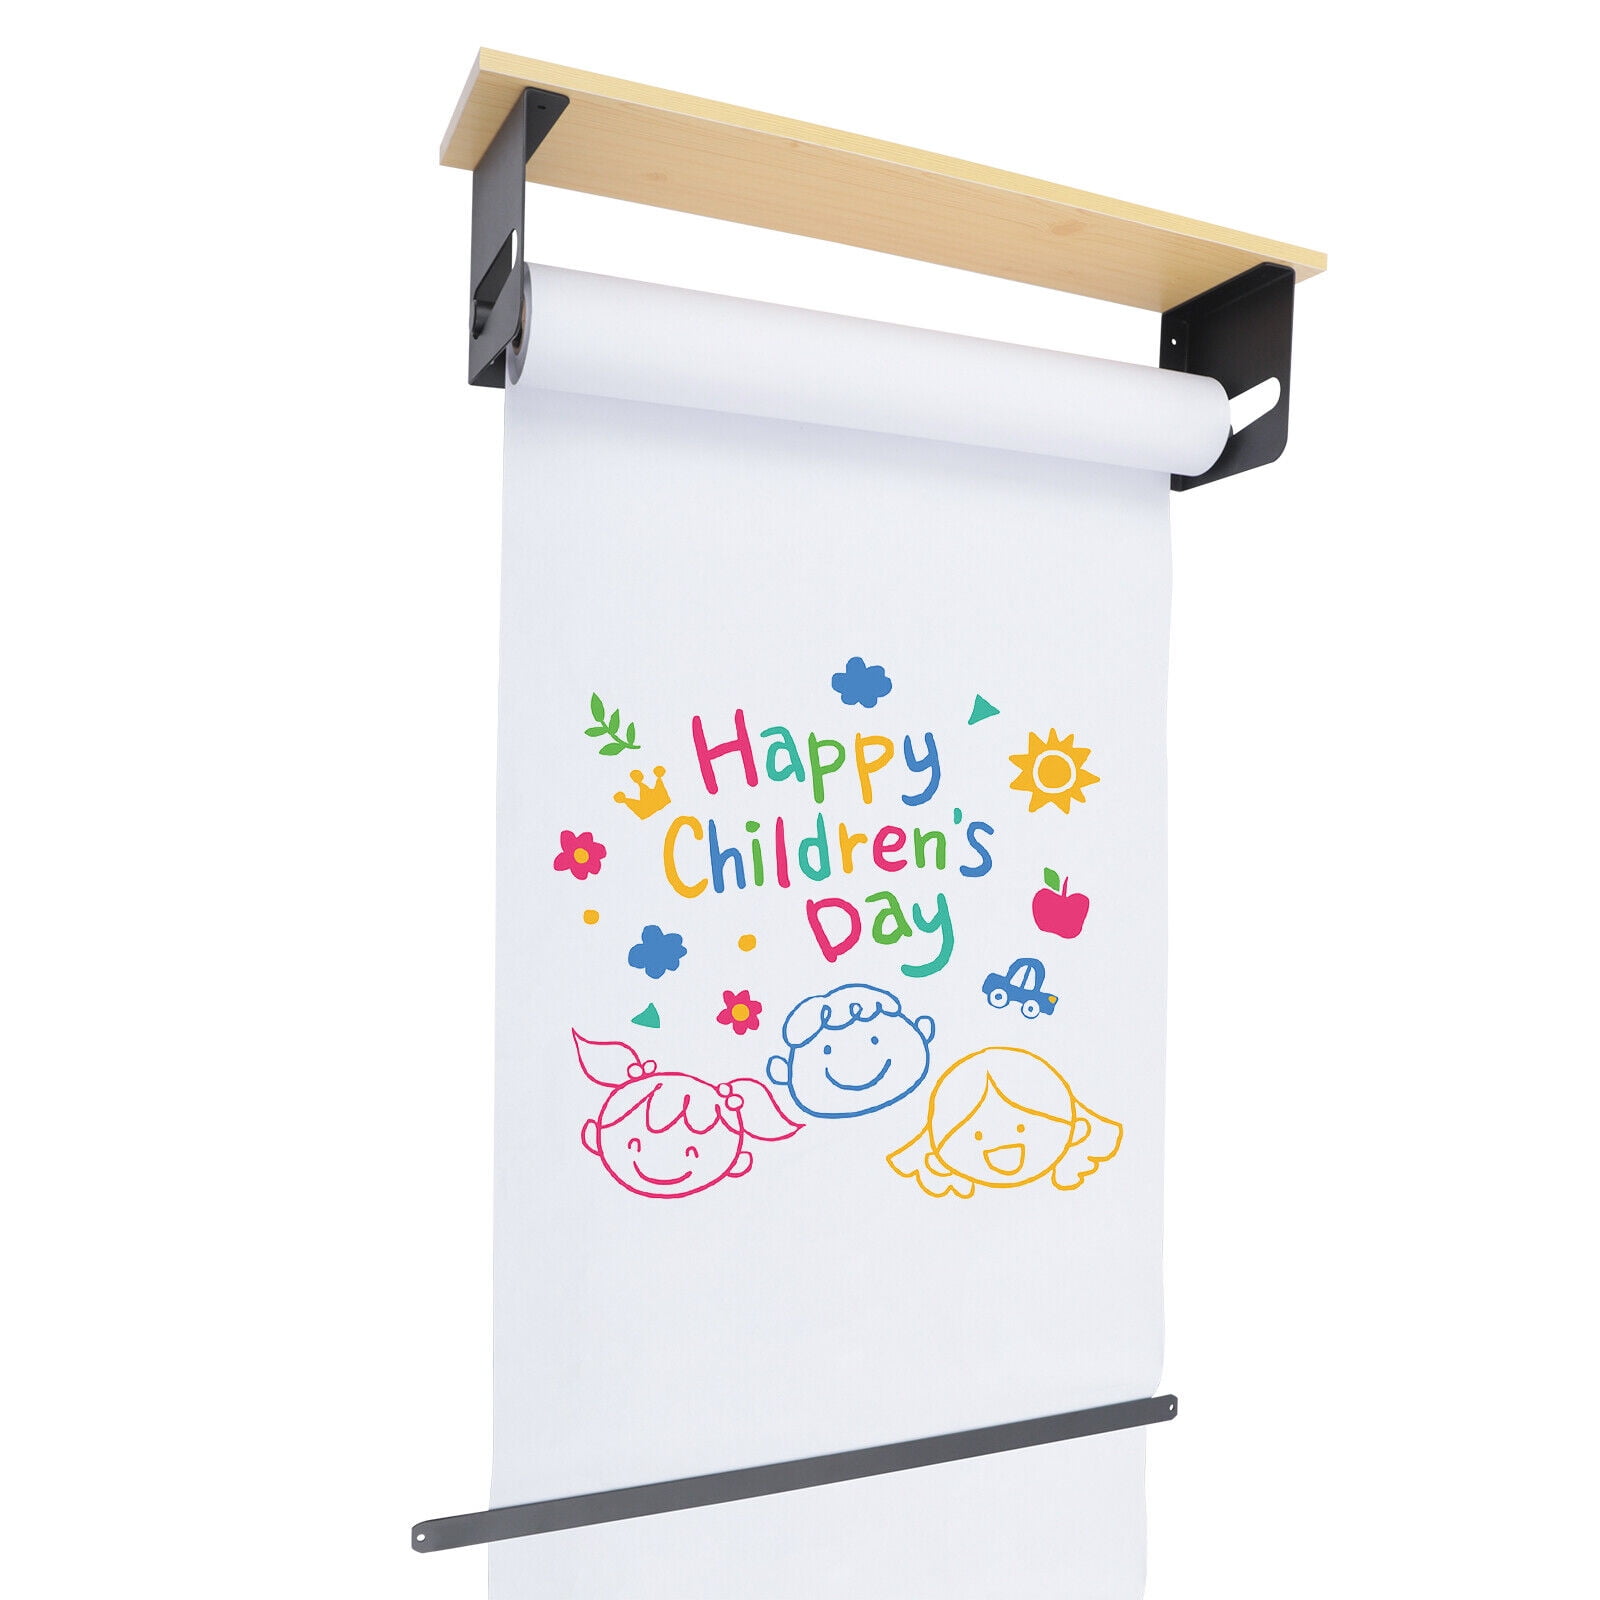 Wall Mounted Note Paper Dispenser with a 160 foot roll of paper included